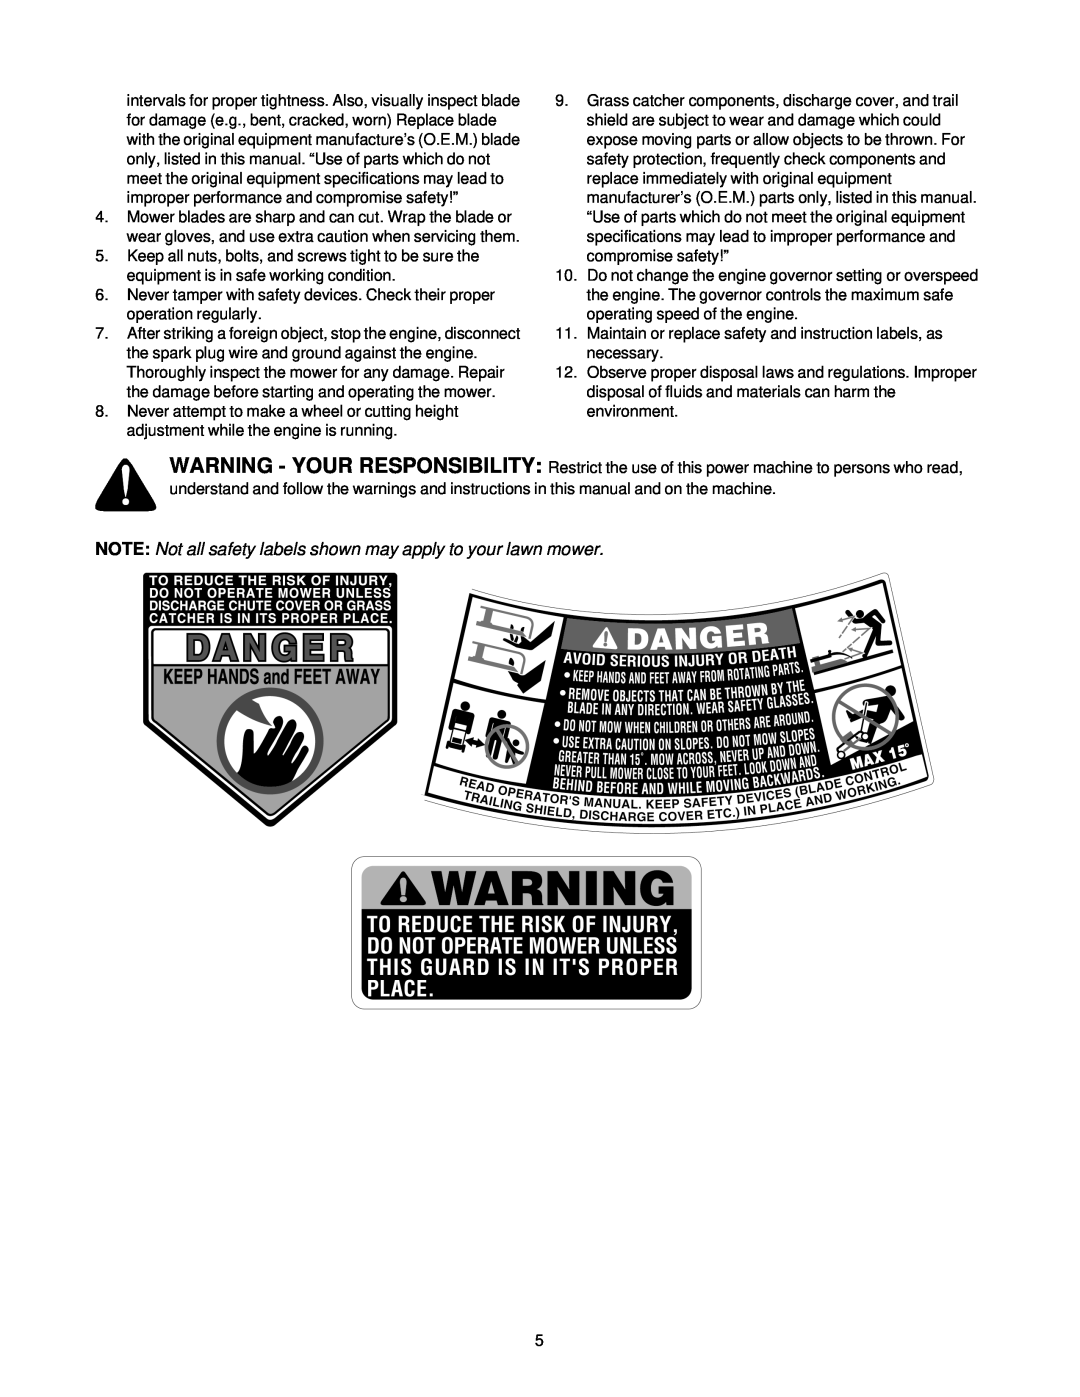 Bolens Series 540 manual NOTE Not all safety labels shown may apply to your lawn mower 